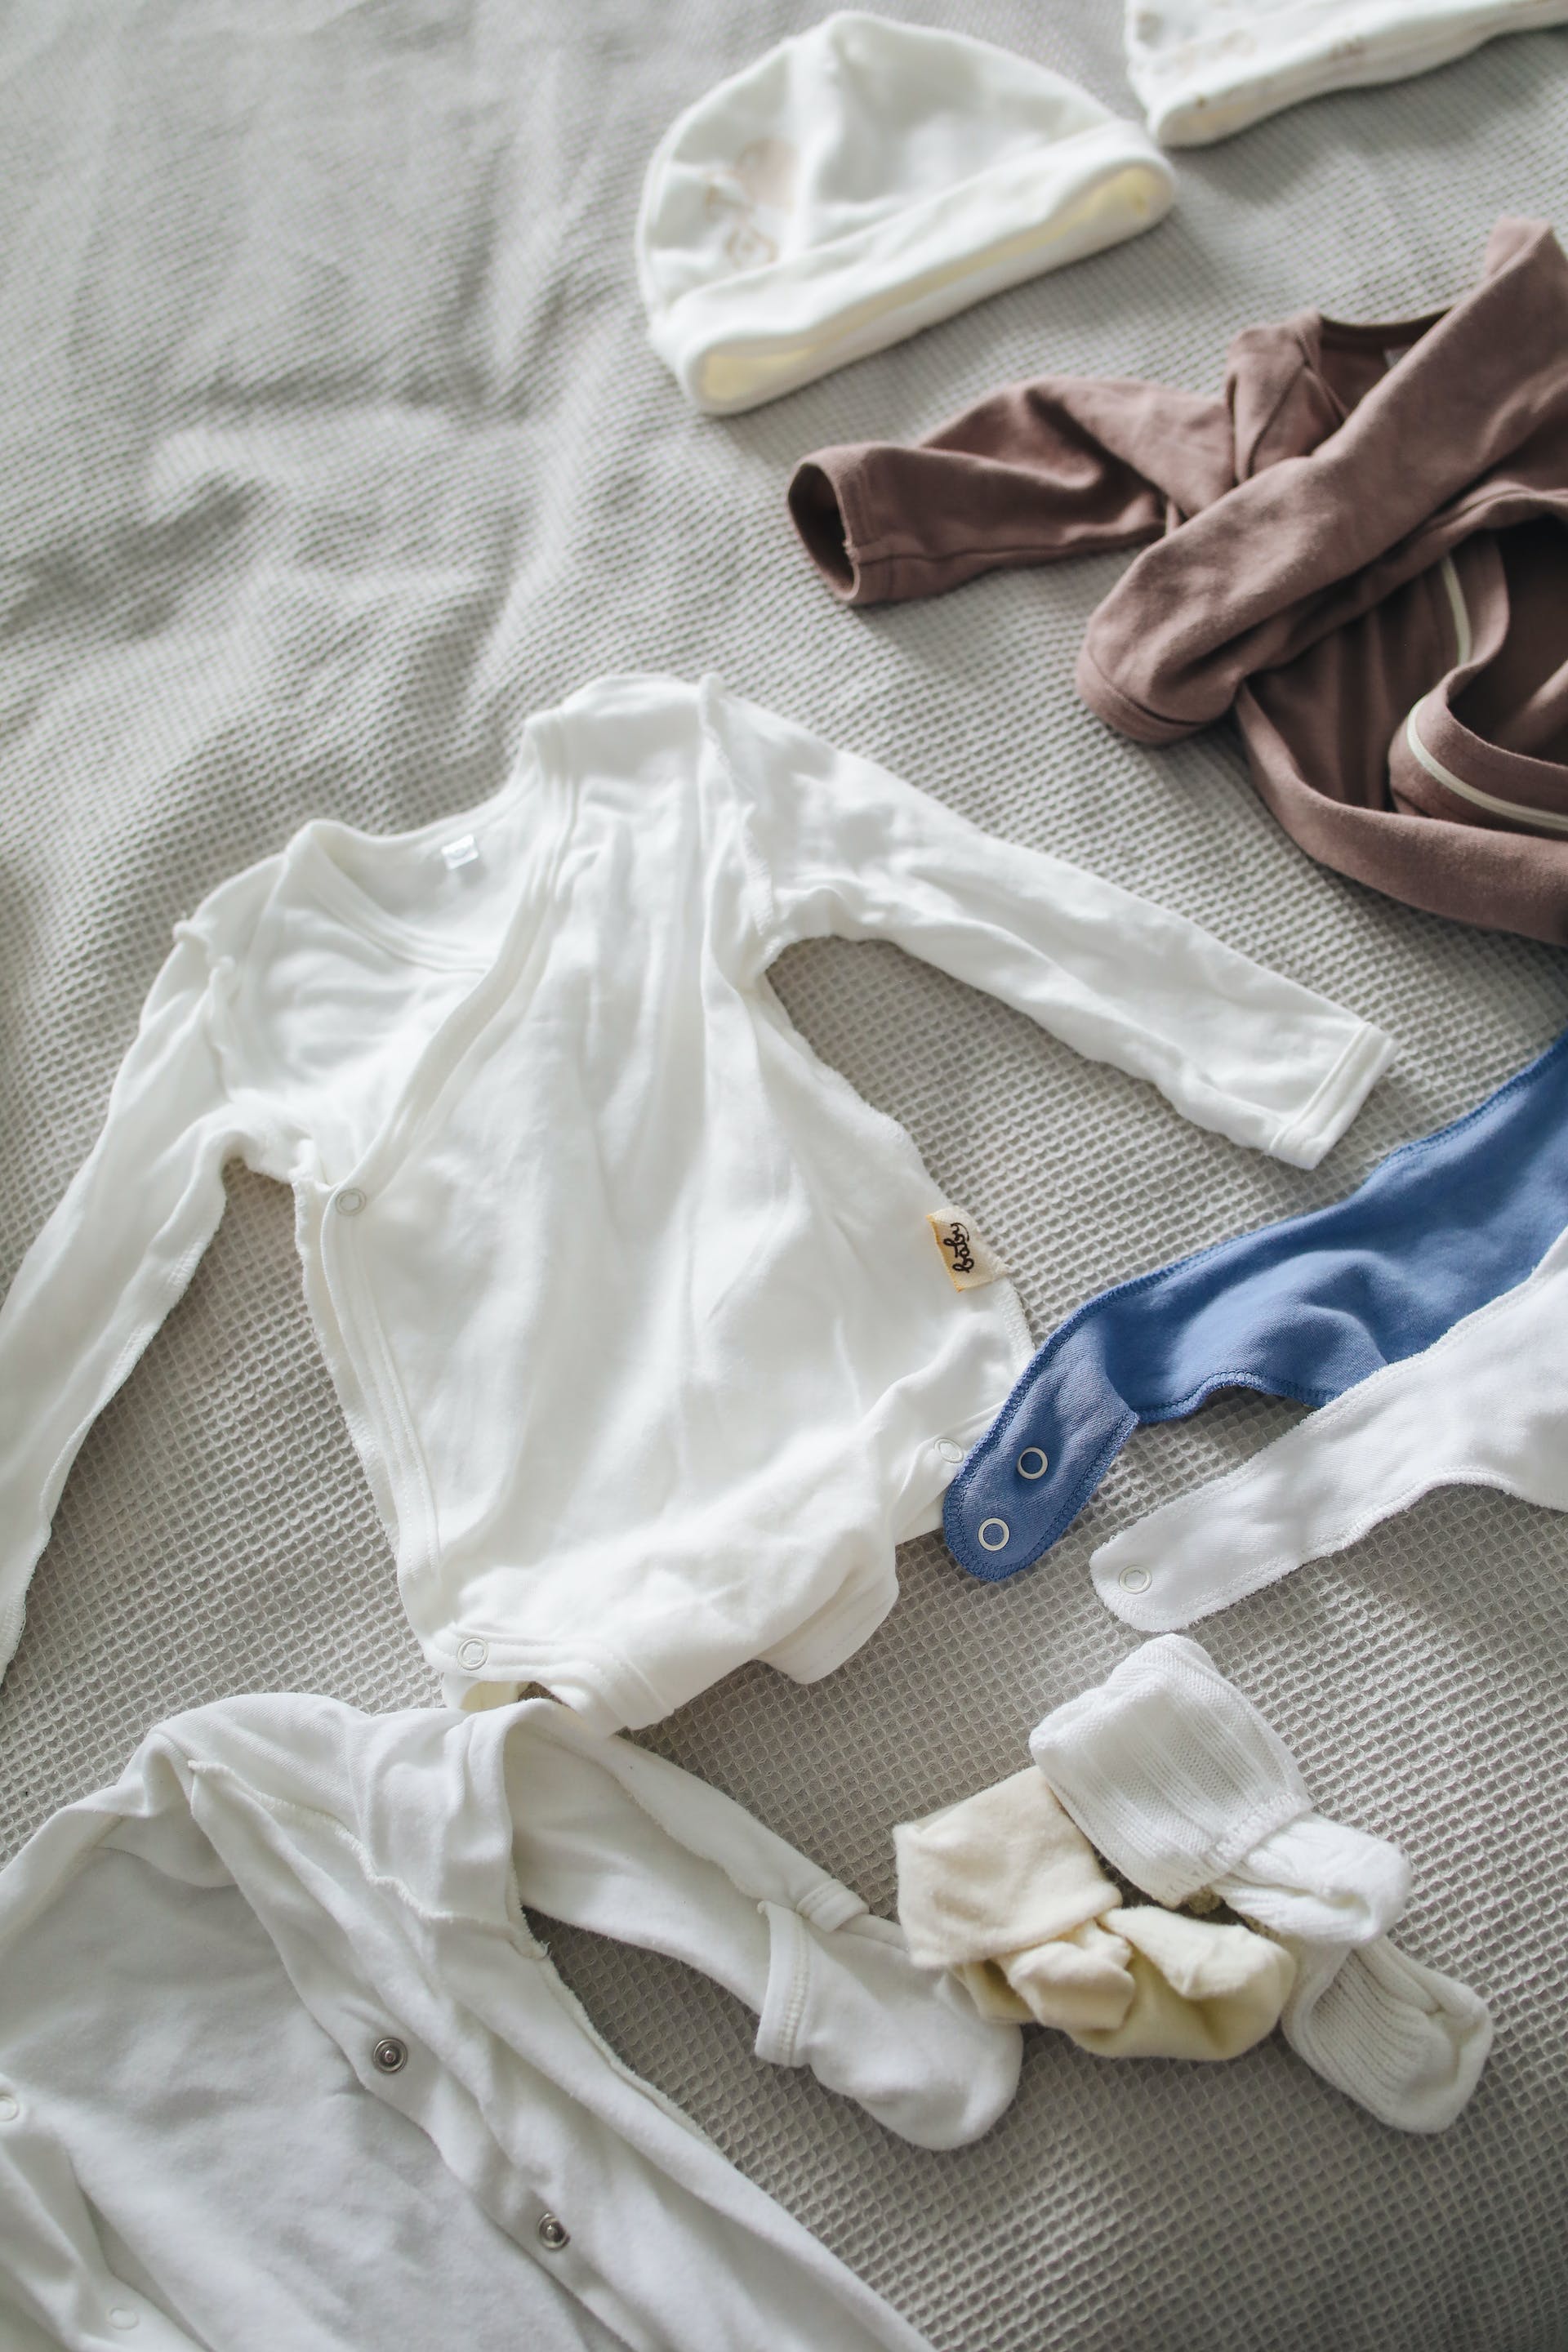 Baby clothes | Source: Pexels